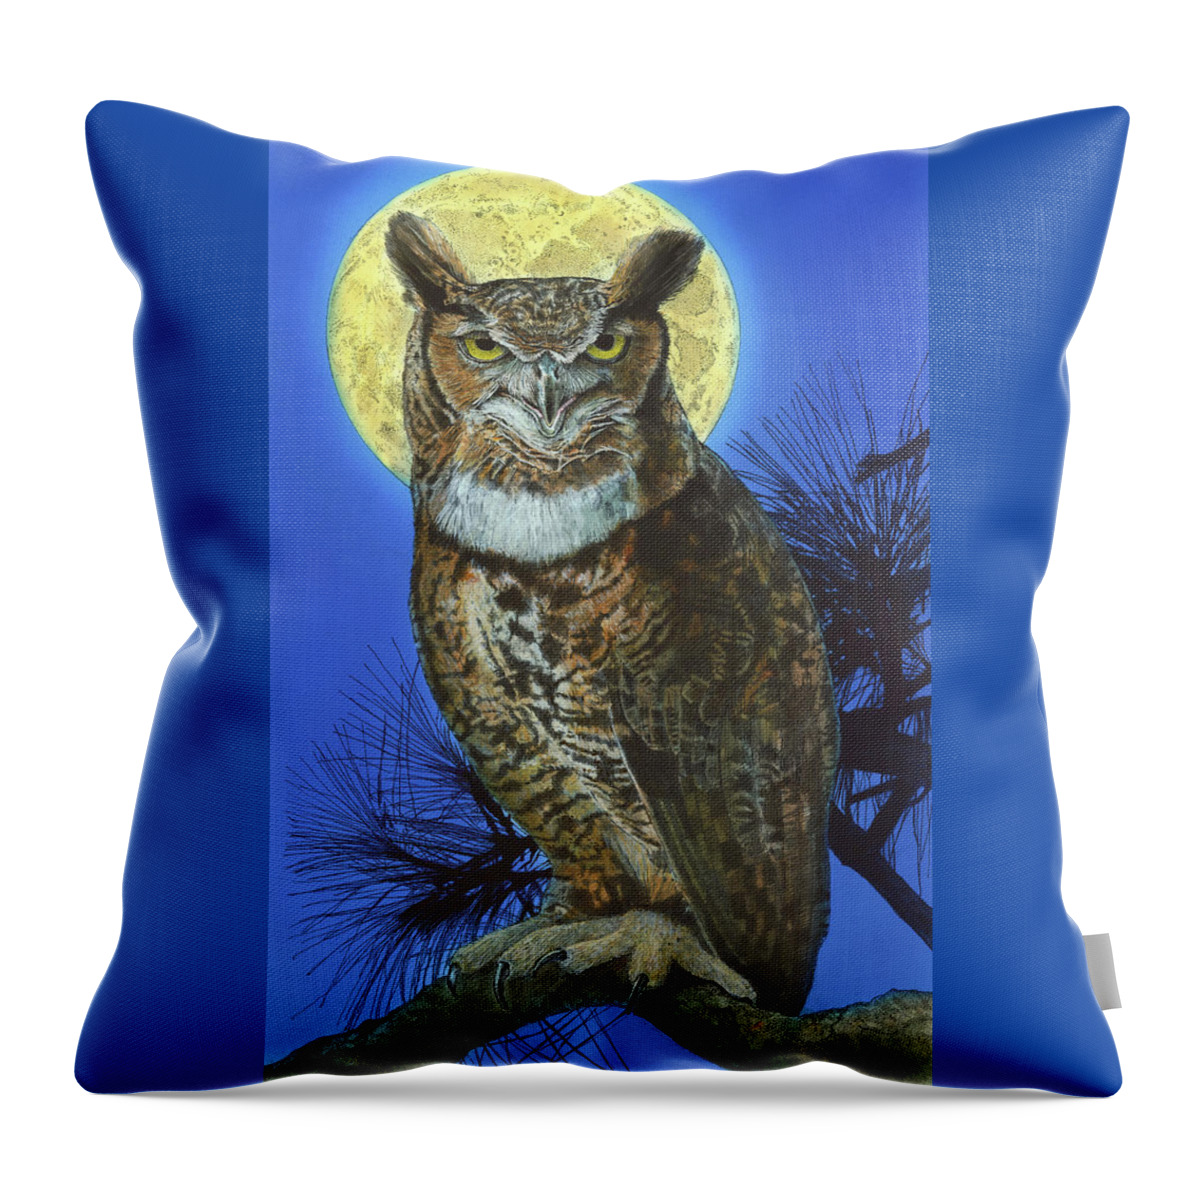 Great Horned Owl Throw Pillow featuring the painting Great Horned Owl 2 by John Dyess